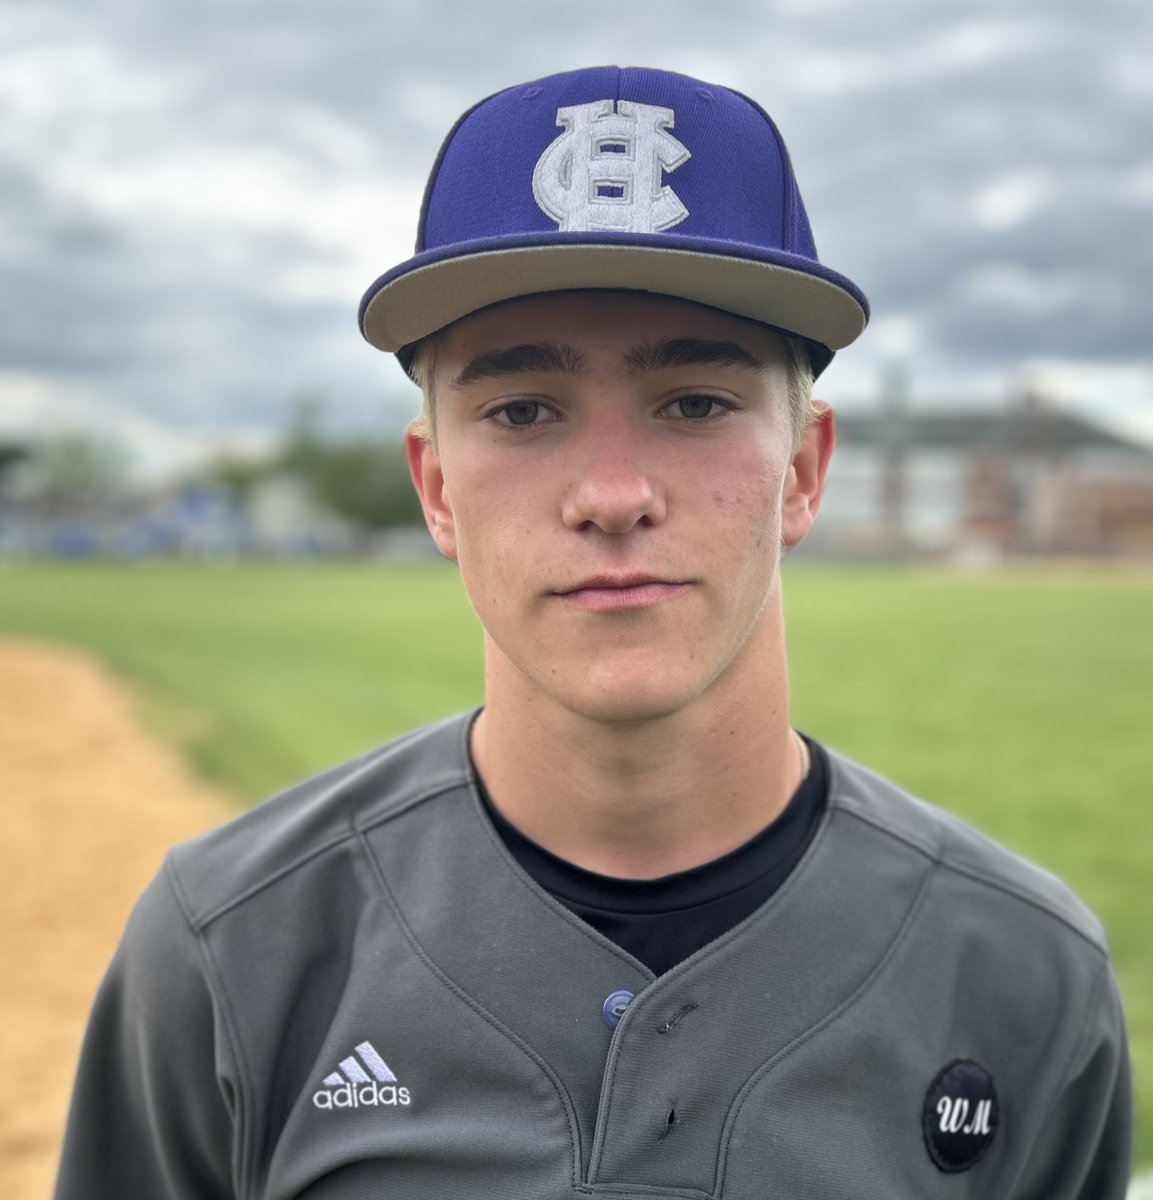 Leo Orefice delivered the game-winning hit, while Ryder Garino threw a complete-game shutout. Cherry Hill West will now compete for its second Joe Hartmann Diamond Classic title on Thursday against Delsea. @CHWestAthletics @CHW_Baseball @SouthCoaches